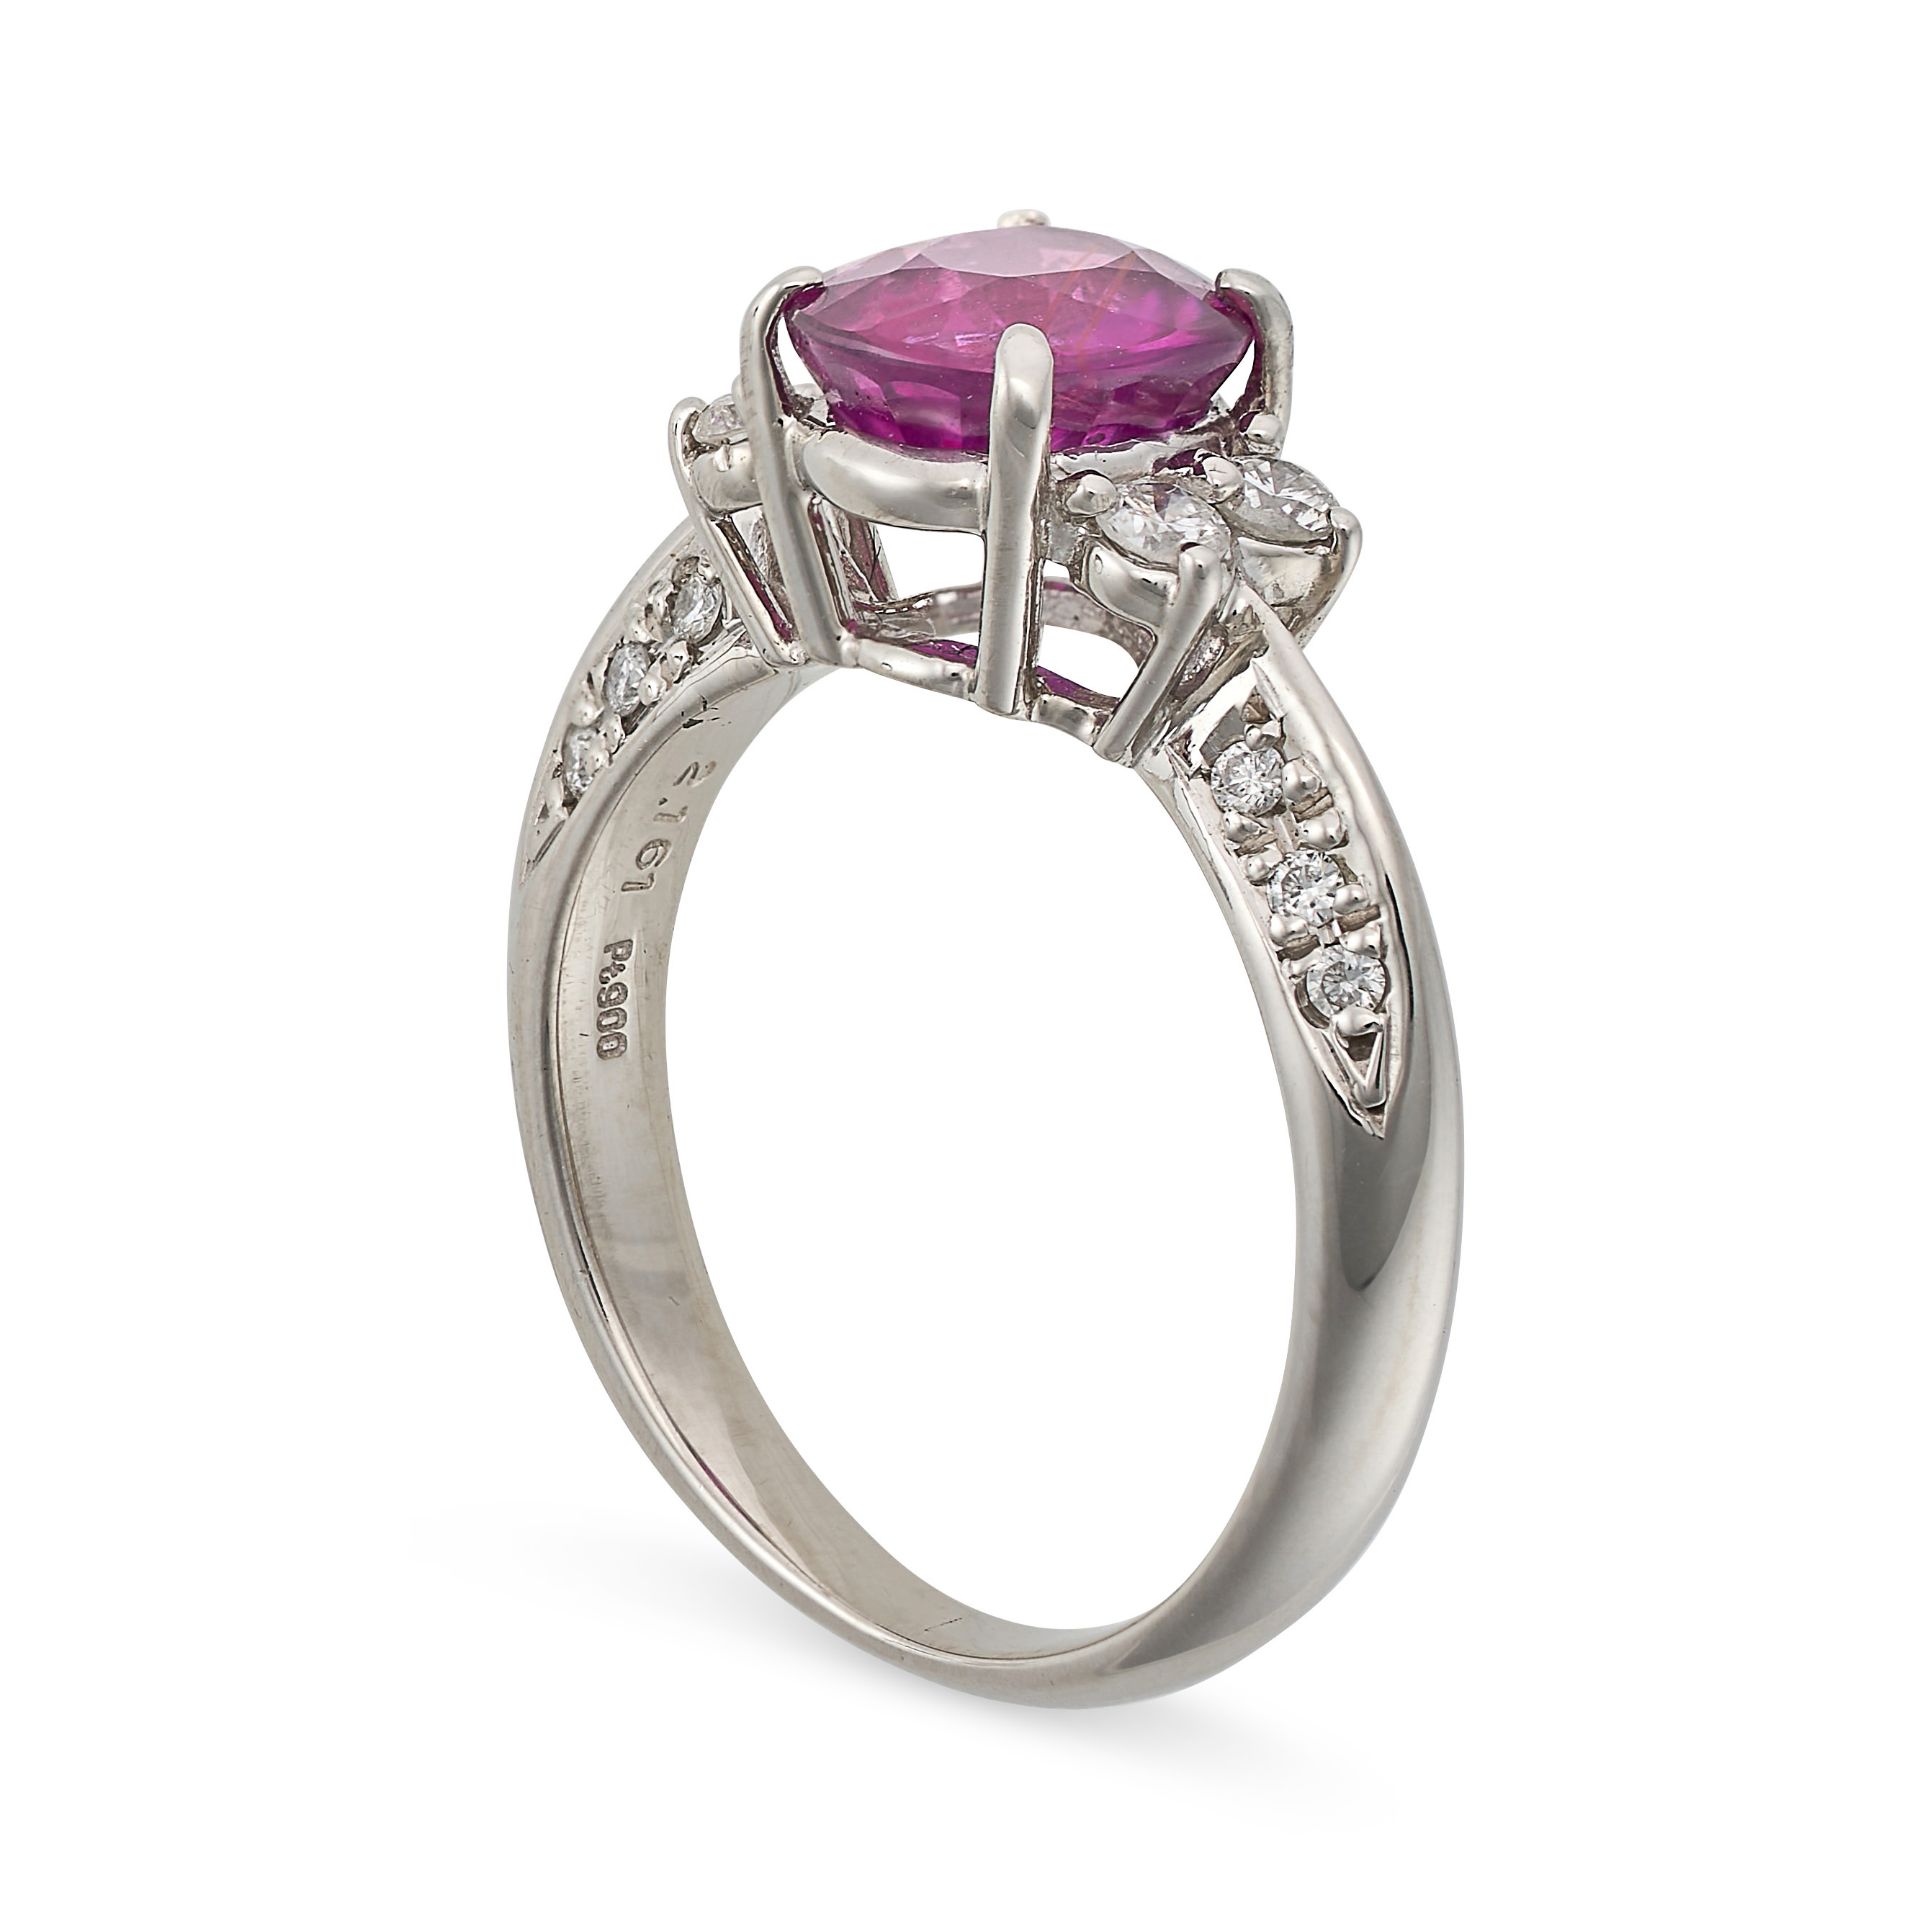 AN UNHEATED RUBY AND DIAMOND RING in platinum, set with an oval cut ruby of 2.16 carats accented ... - Image 4 of 4